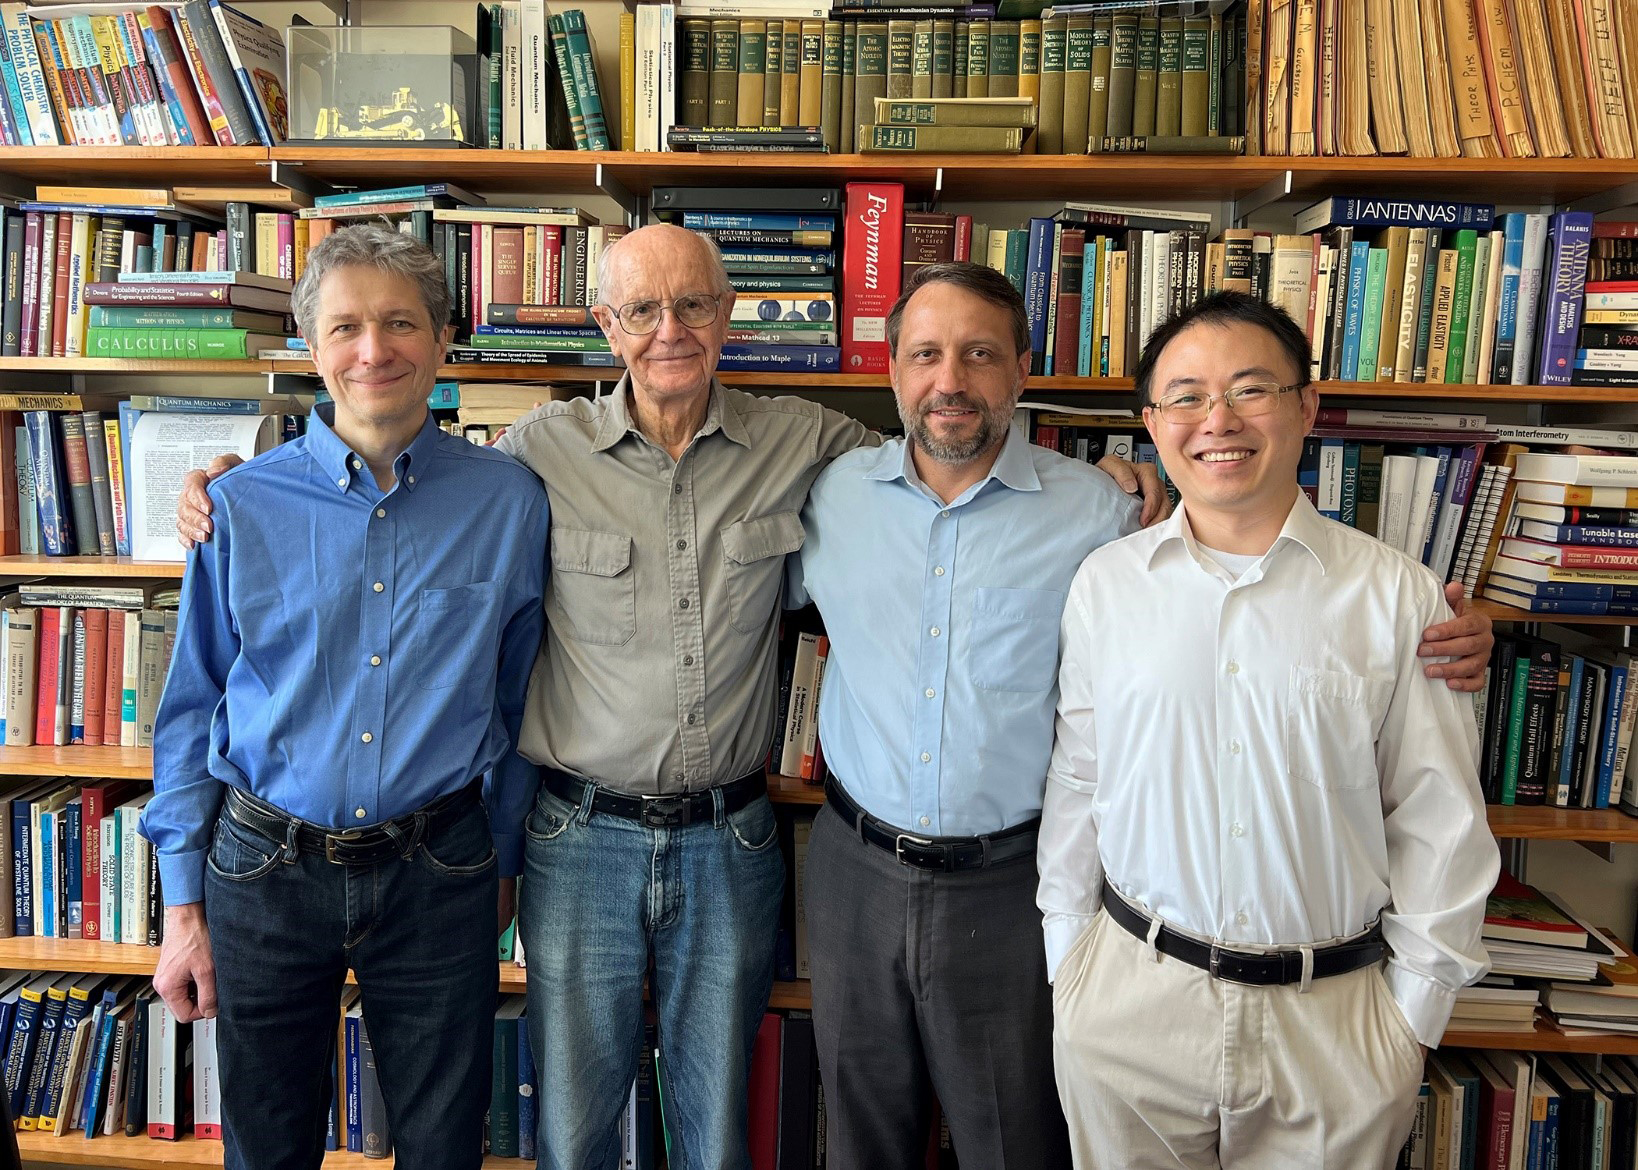 Texas A&amp;M University physicists (from left) Dr. Aleksei Zheltikov, Dr. Marlan Scully, Dr. Alexei Sokolov and Dr. Zhenhuan Yi pose in the Institute for Quantum Science and Engineering library on the Texas A&amp;M campus